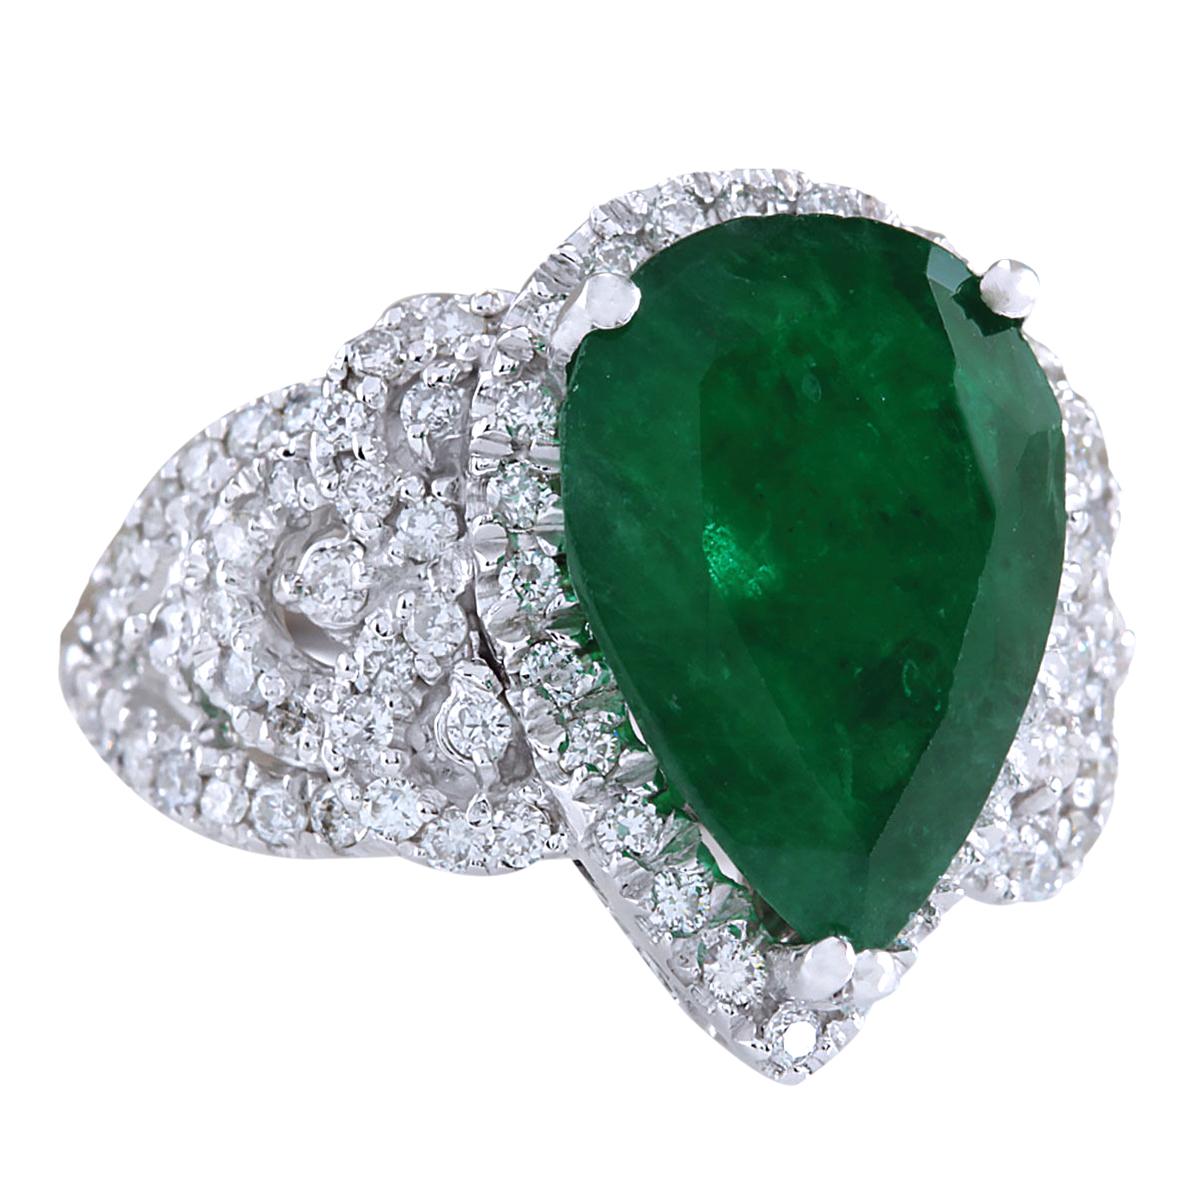 Indulge in the timeless elegance of this exquisite Emerald Diamond Ring crafted in luxurious 14K White Gold. With a total weight of 8.20 carats, this ring is a radiant celebration of opulence and sophistication.

At its center, a breathtaking 6.20